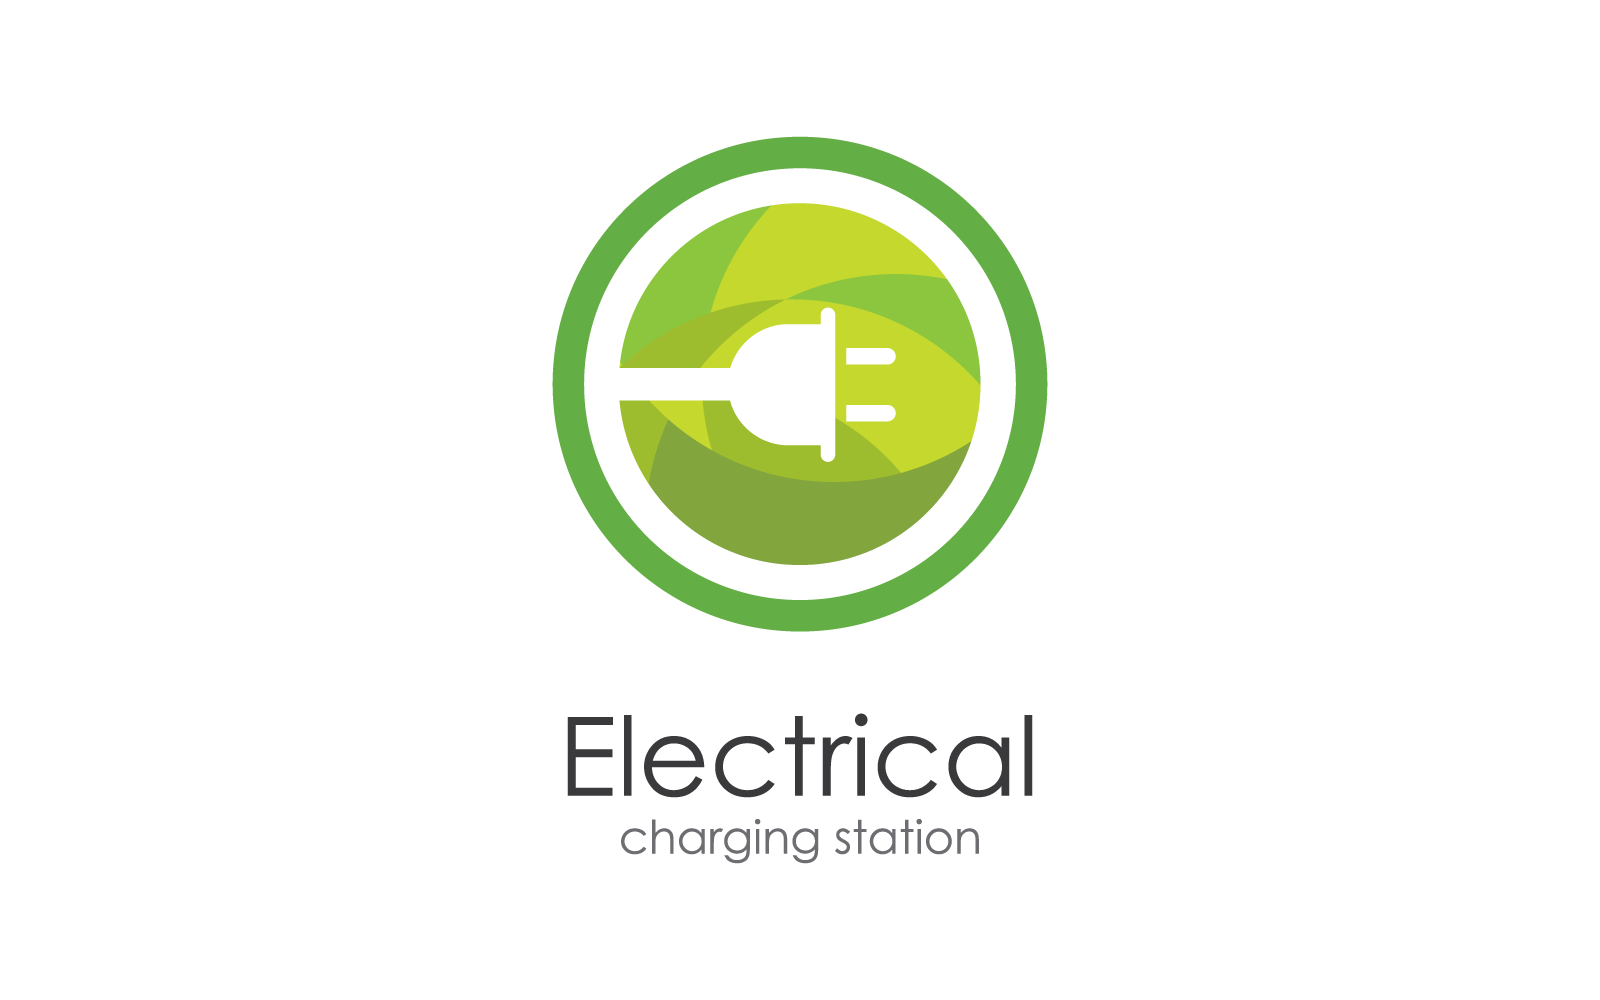 Electrical charging station logo vector icon Logo Template